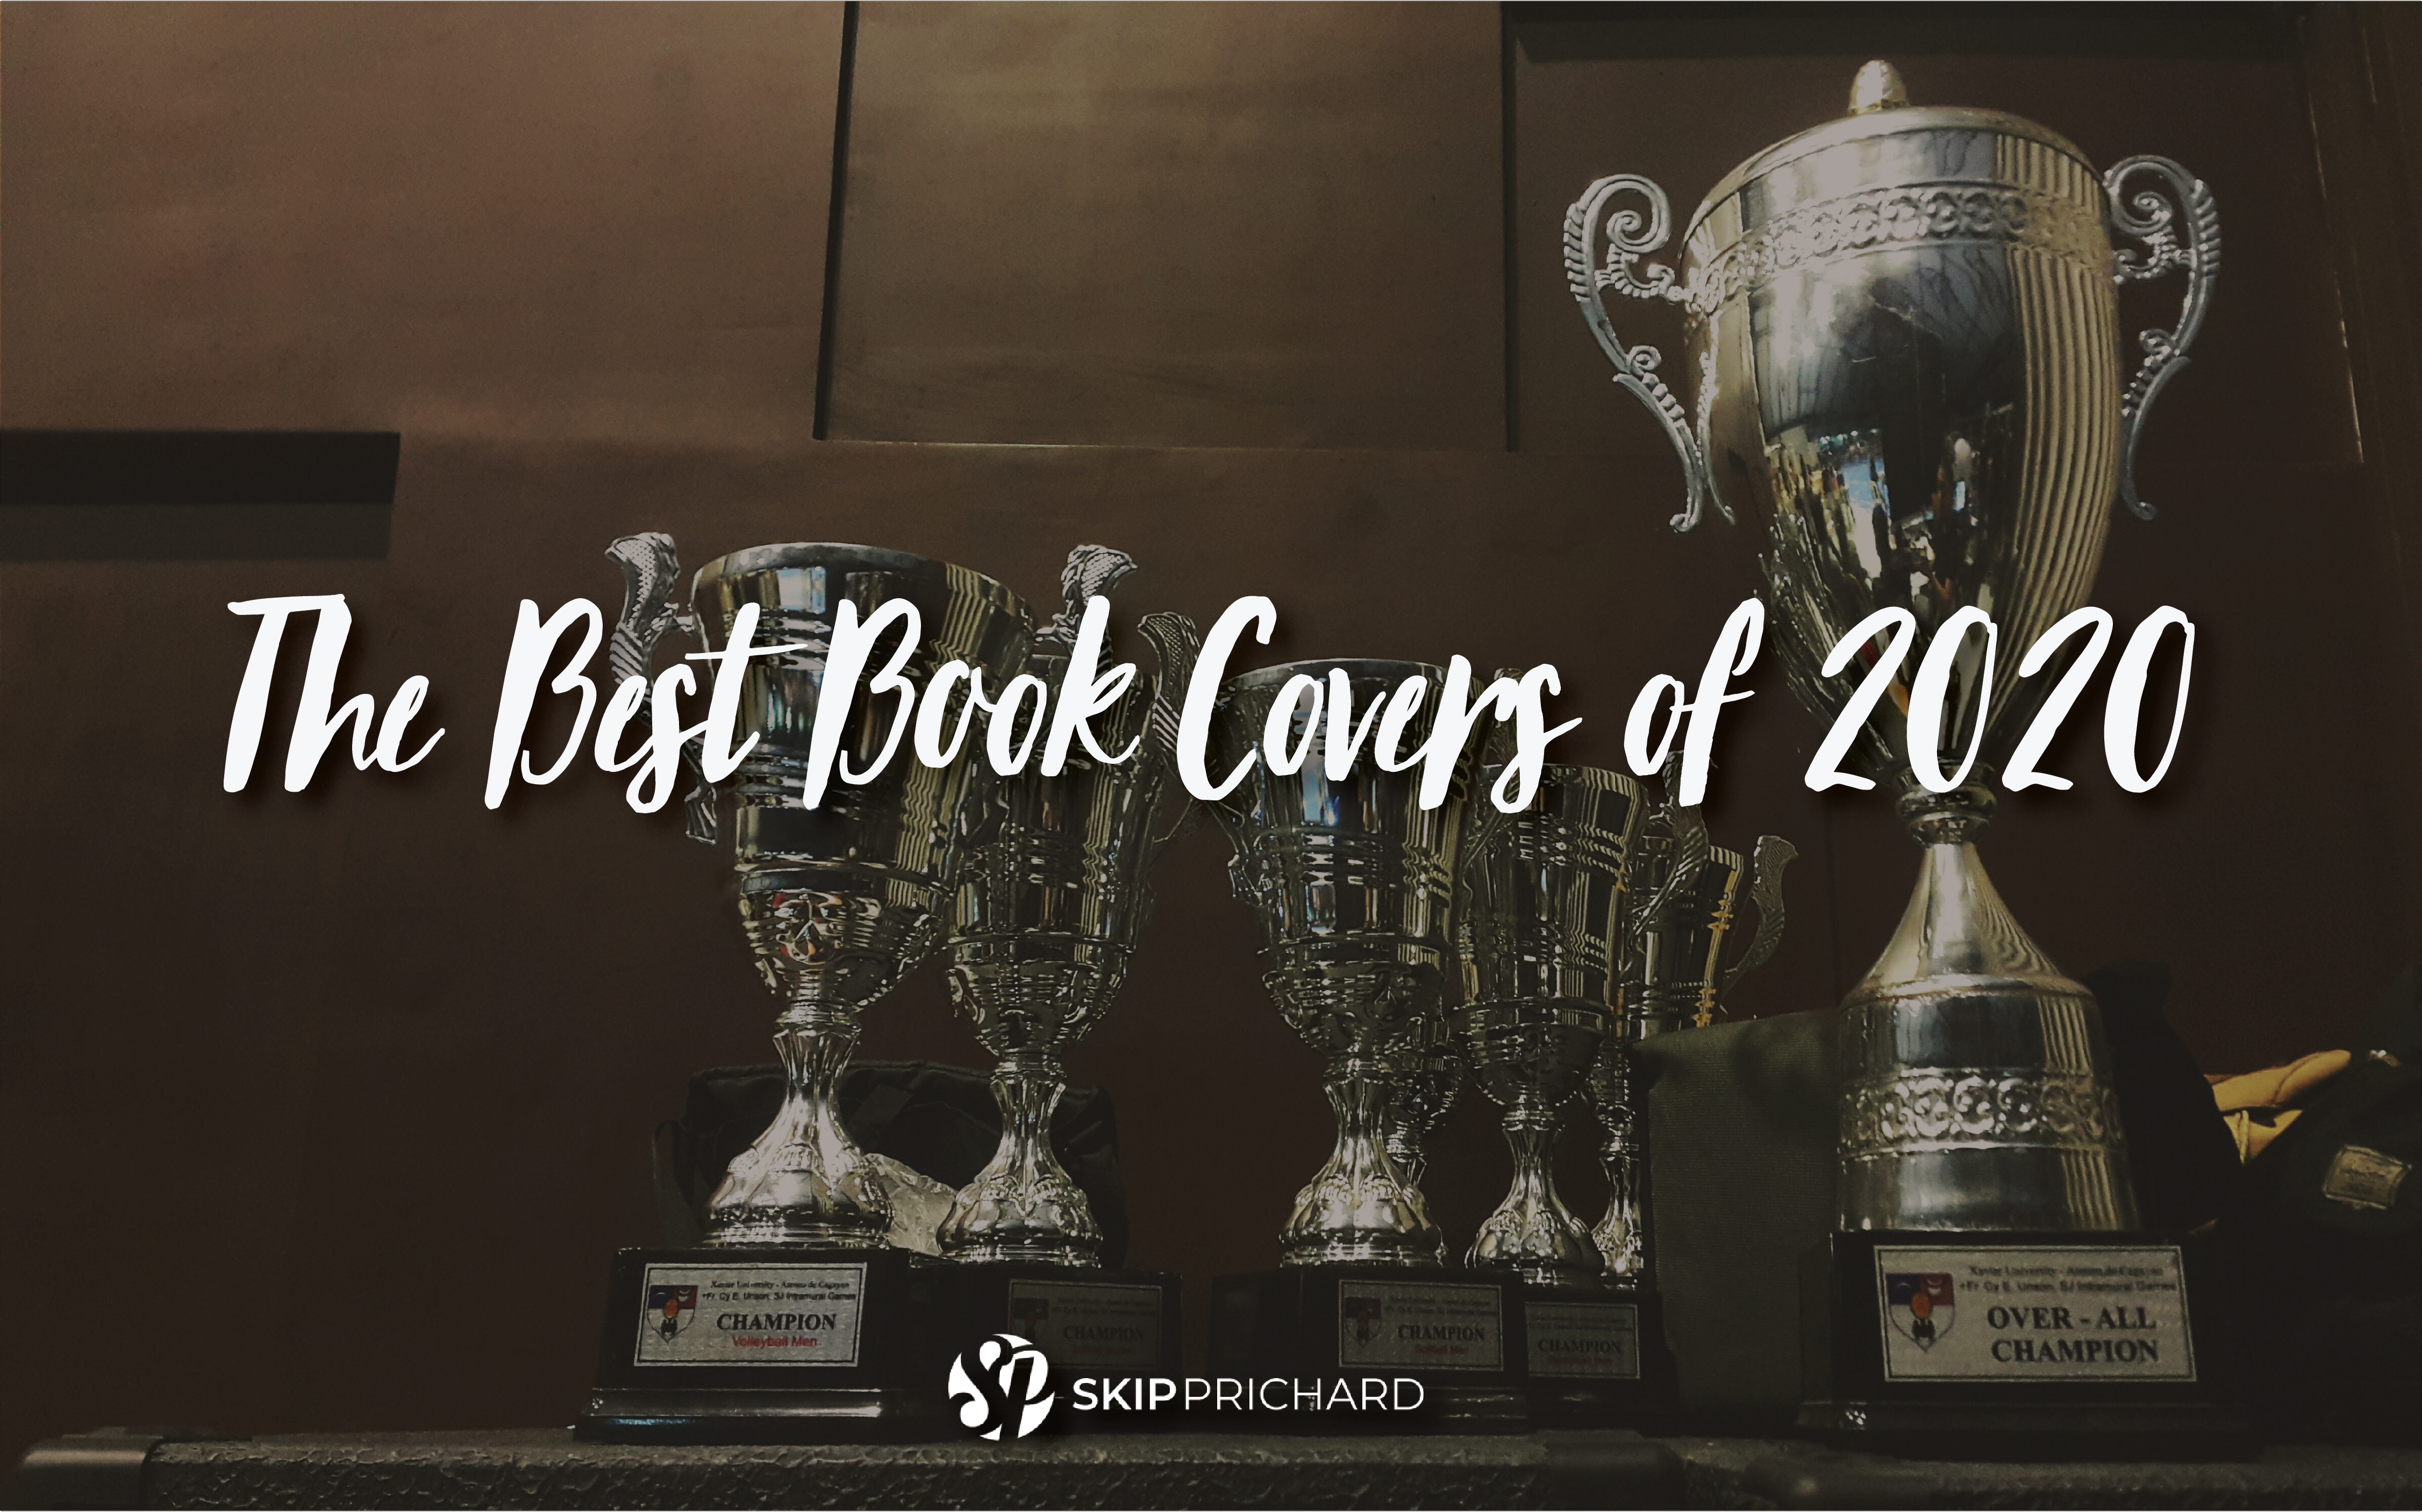 The Best Book Covers of 2020